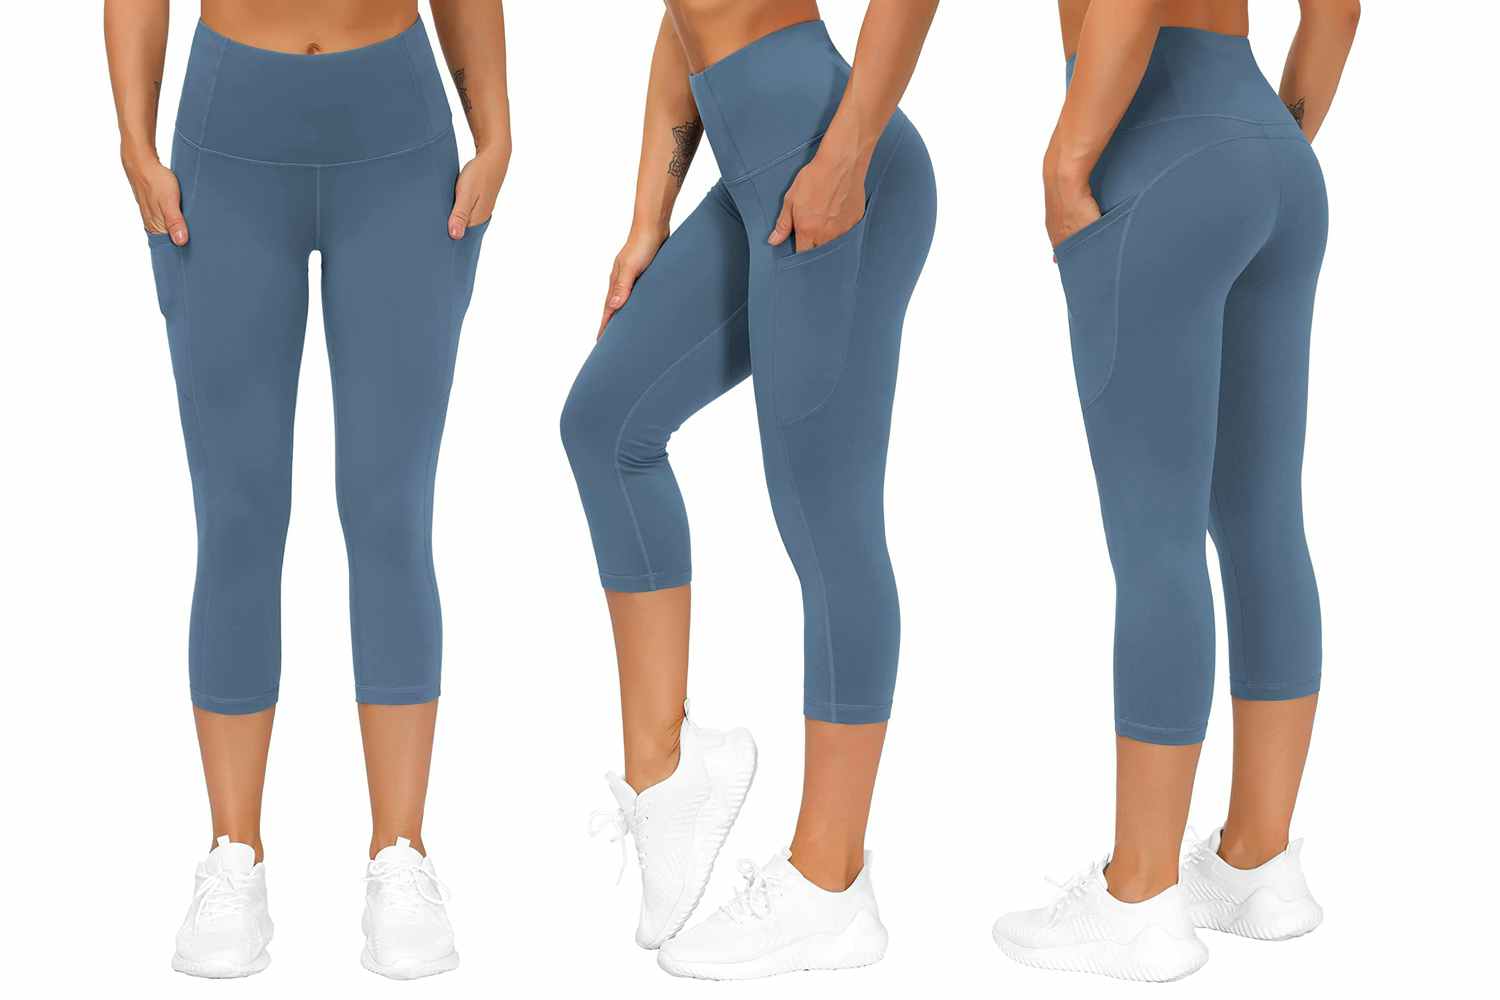 The Gym People Thick High Waist Yoga Pants w/ Pockets in smoke blue-gray